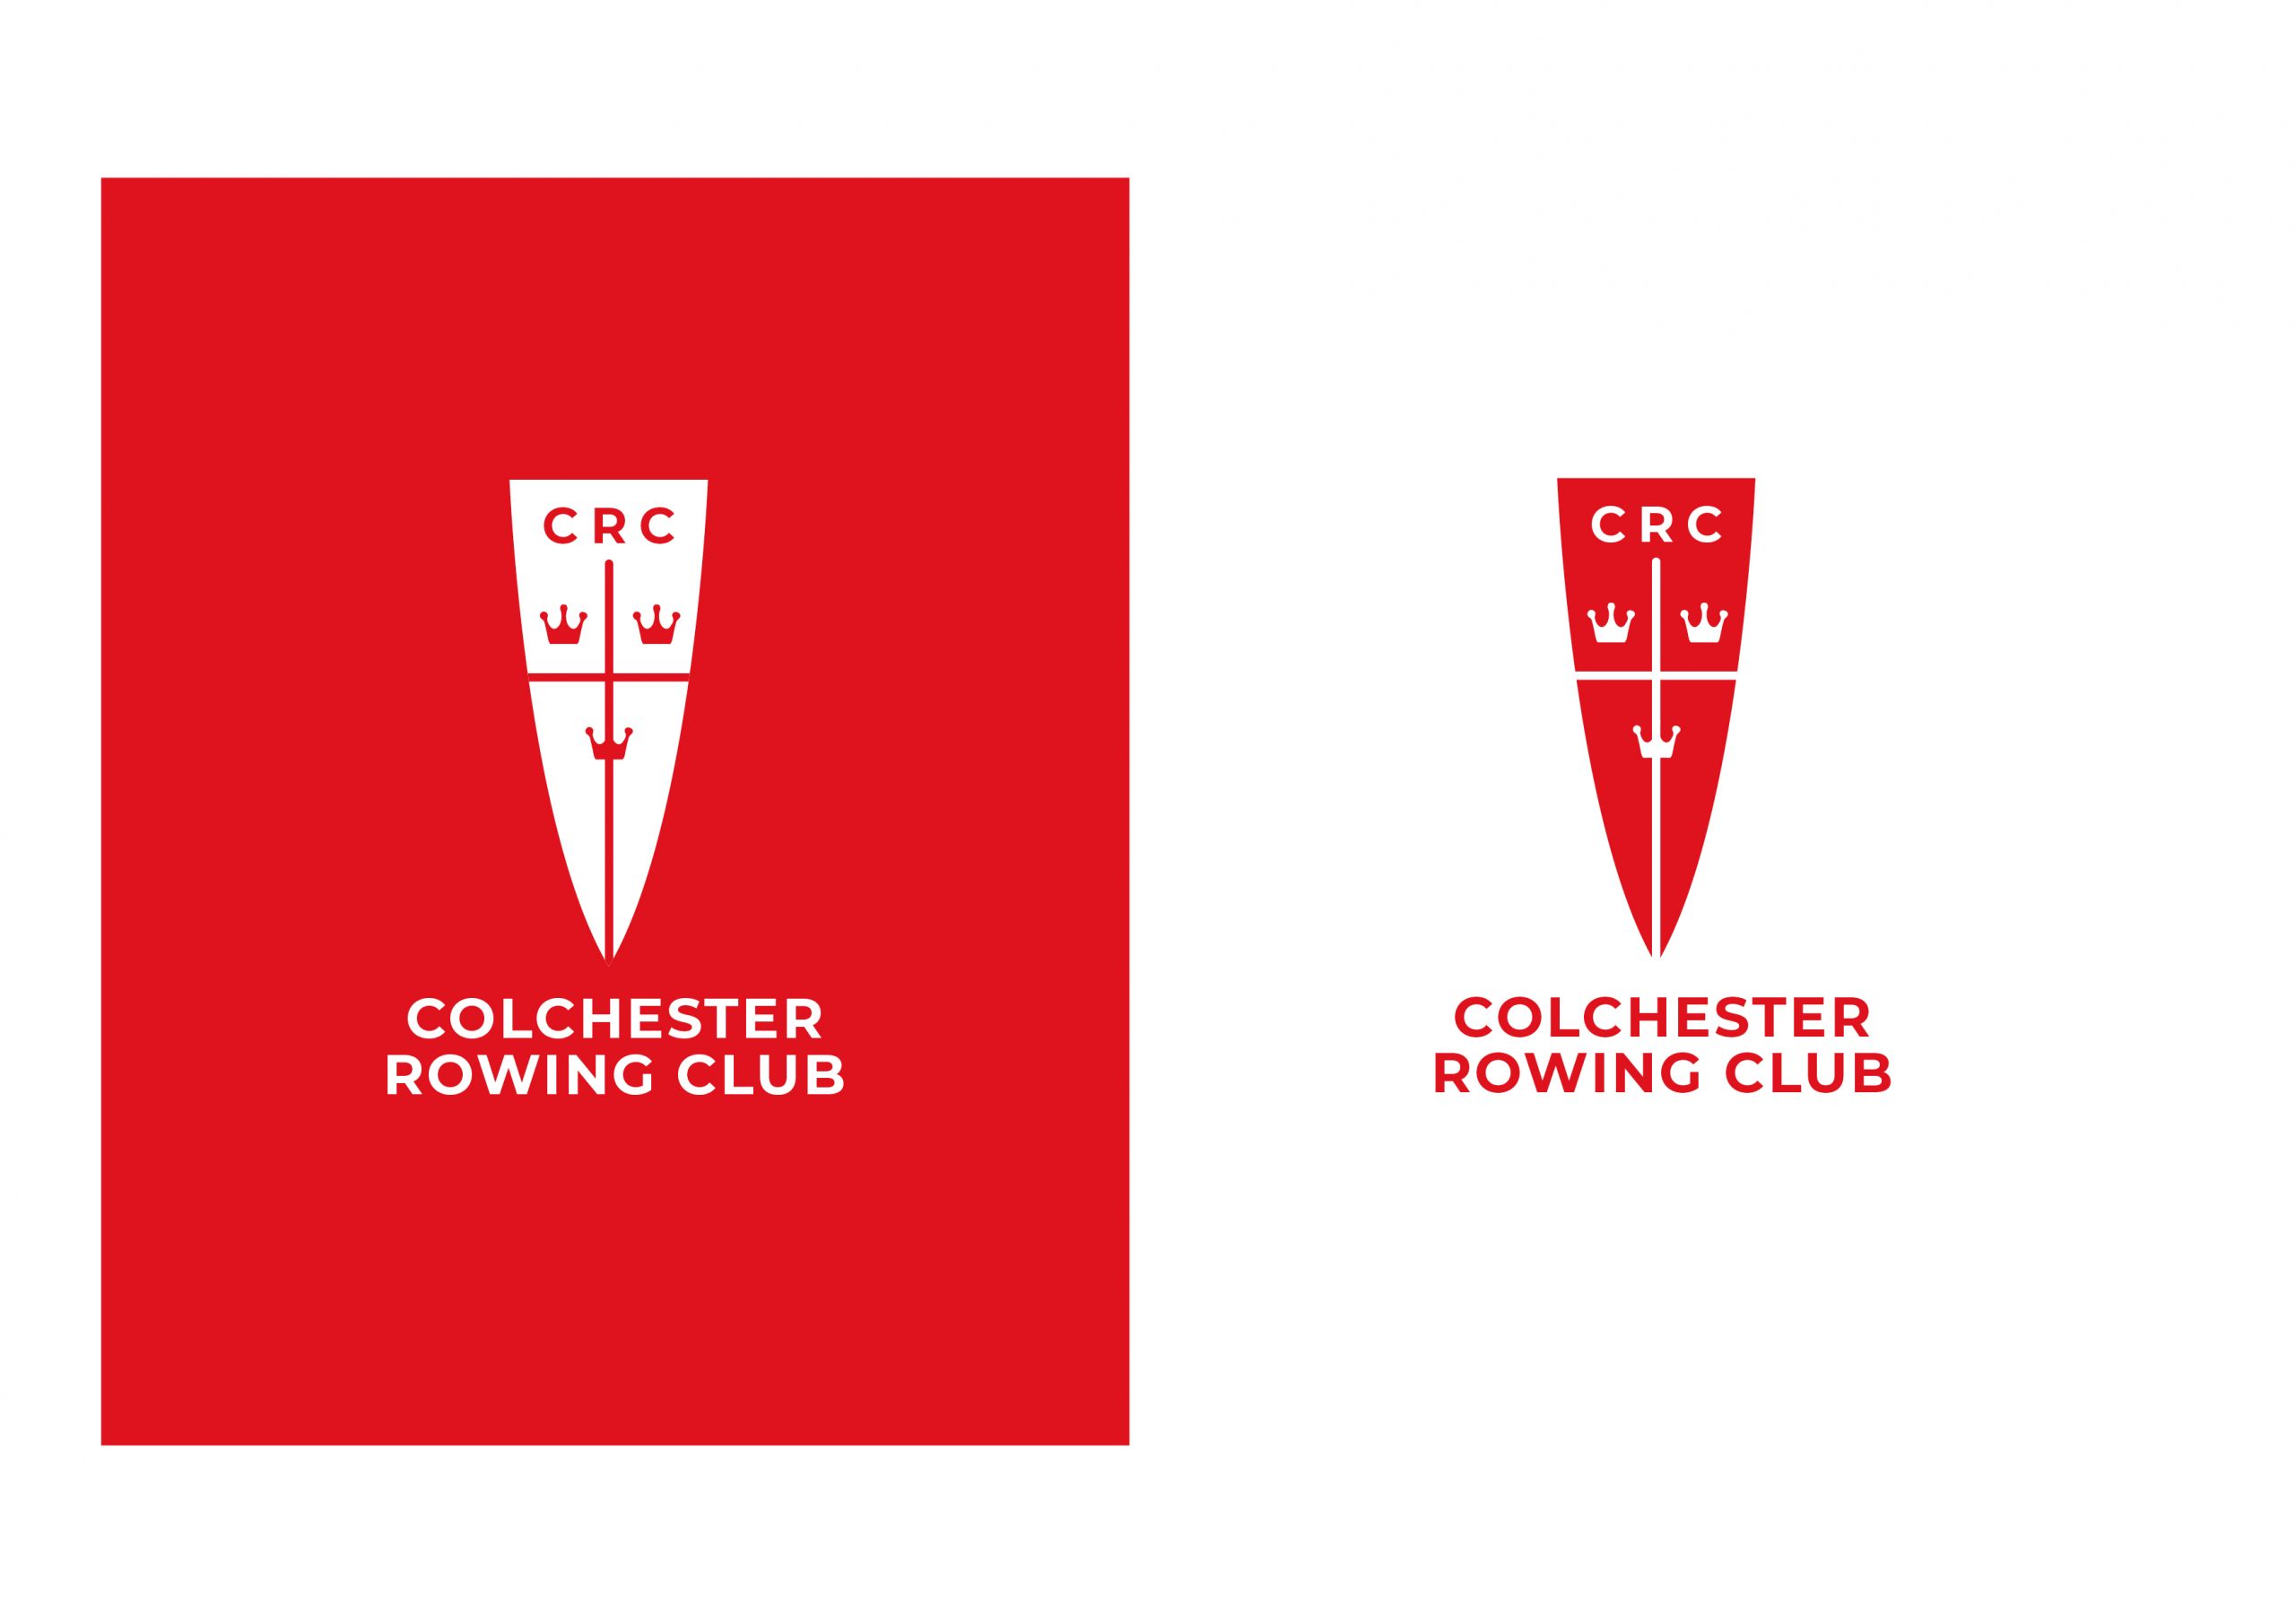 Image of Paul Hailes Design work for Colchester Rowing Club finished logo.